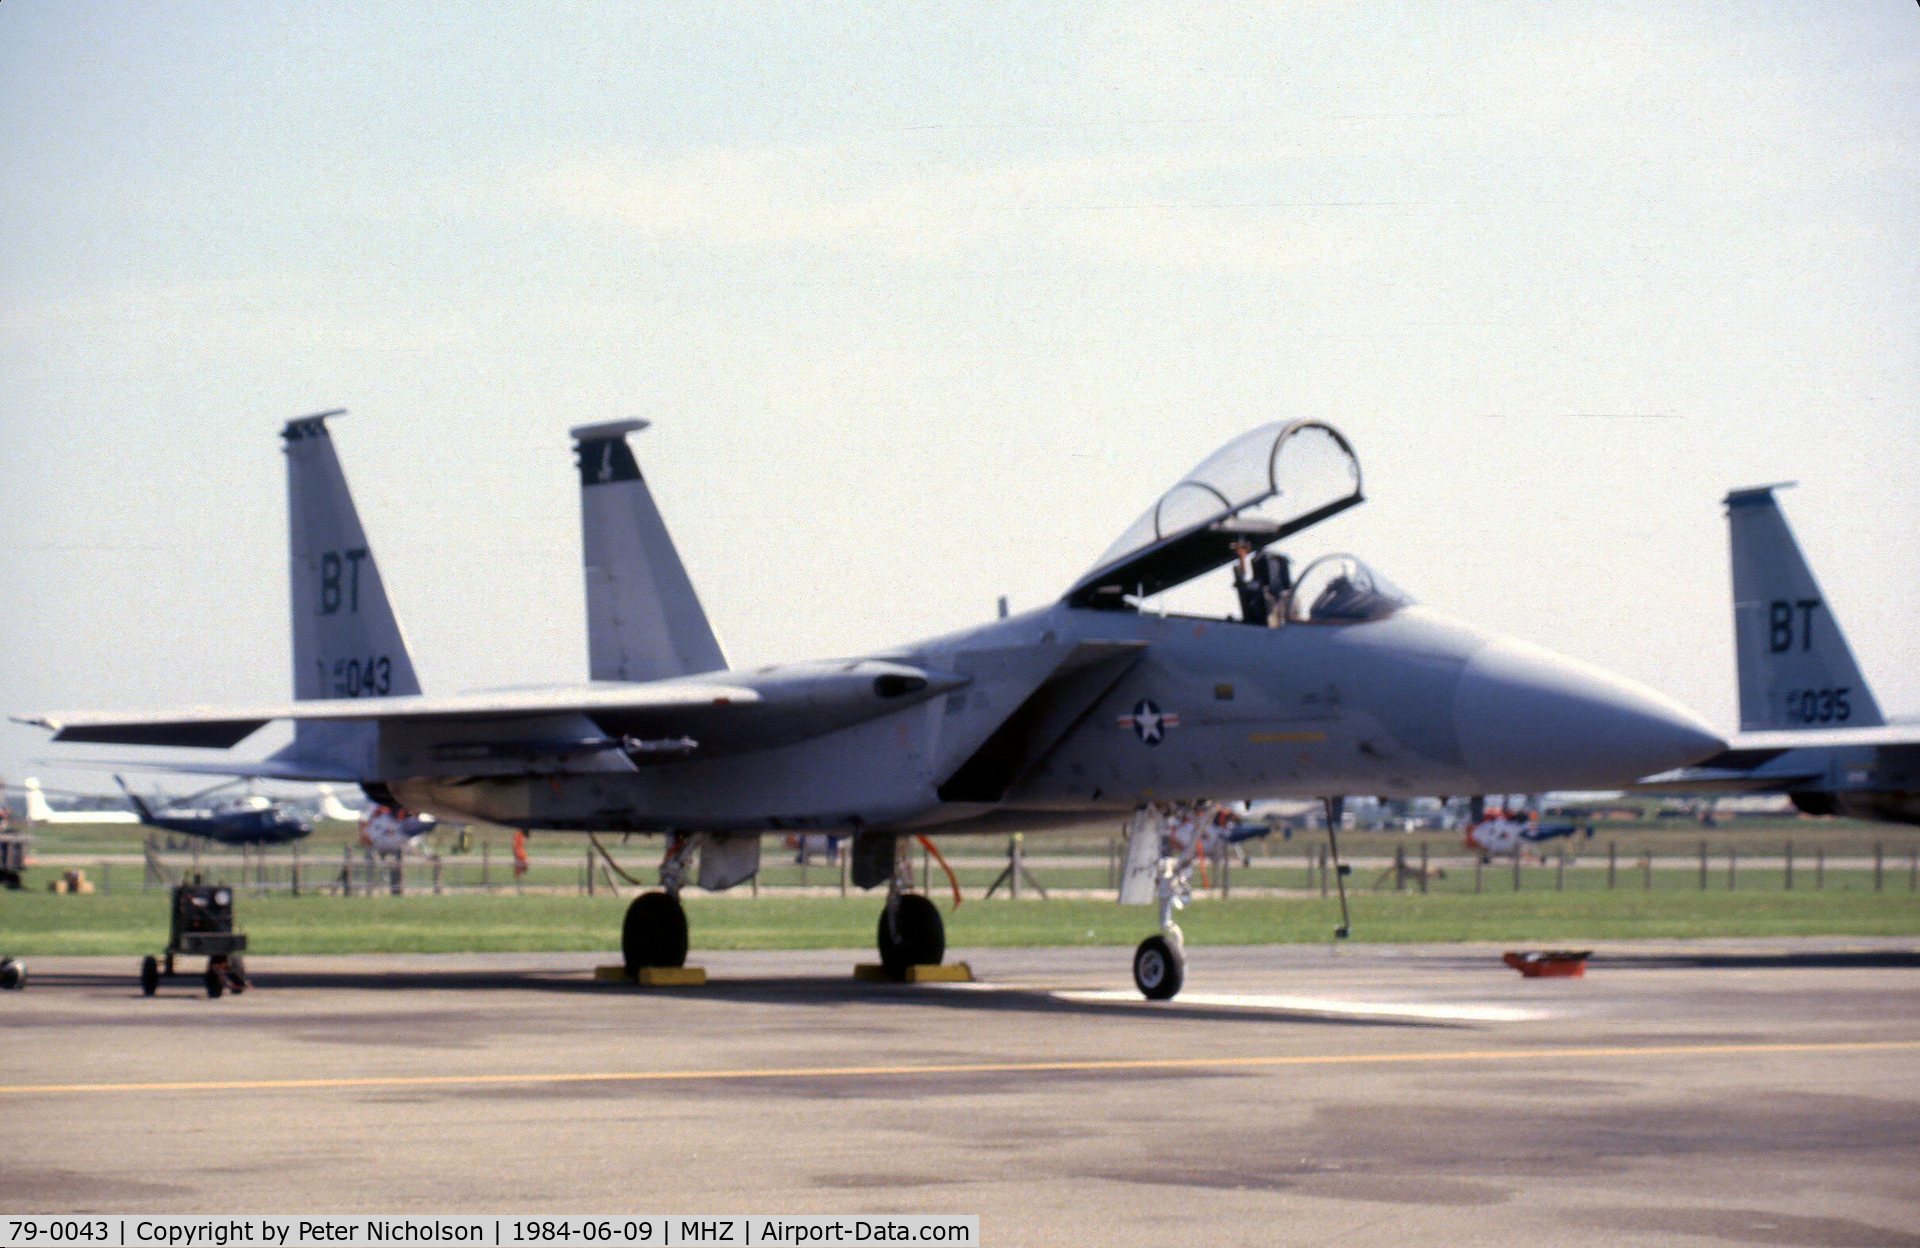 79-0043, 1979 McDonnell Douglas F-15C Eagle C/N 0584/C112, F-15C Eagle of 36 Tactical Fighter Wing at the 1984 RAF Mildenhall Air Fete.